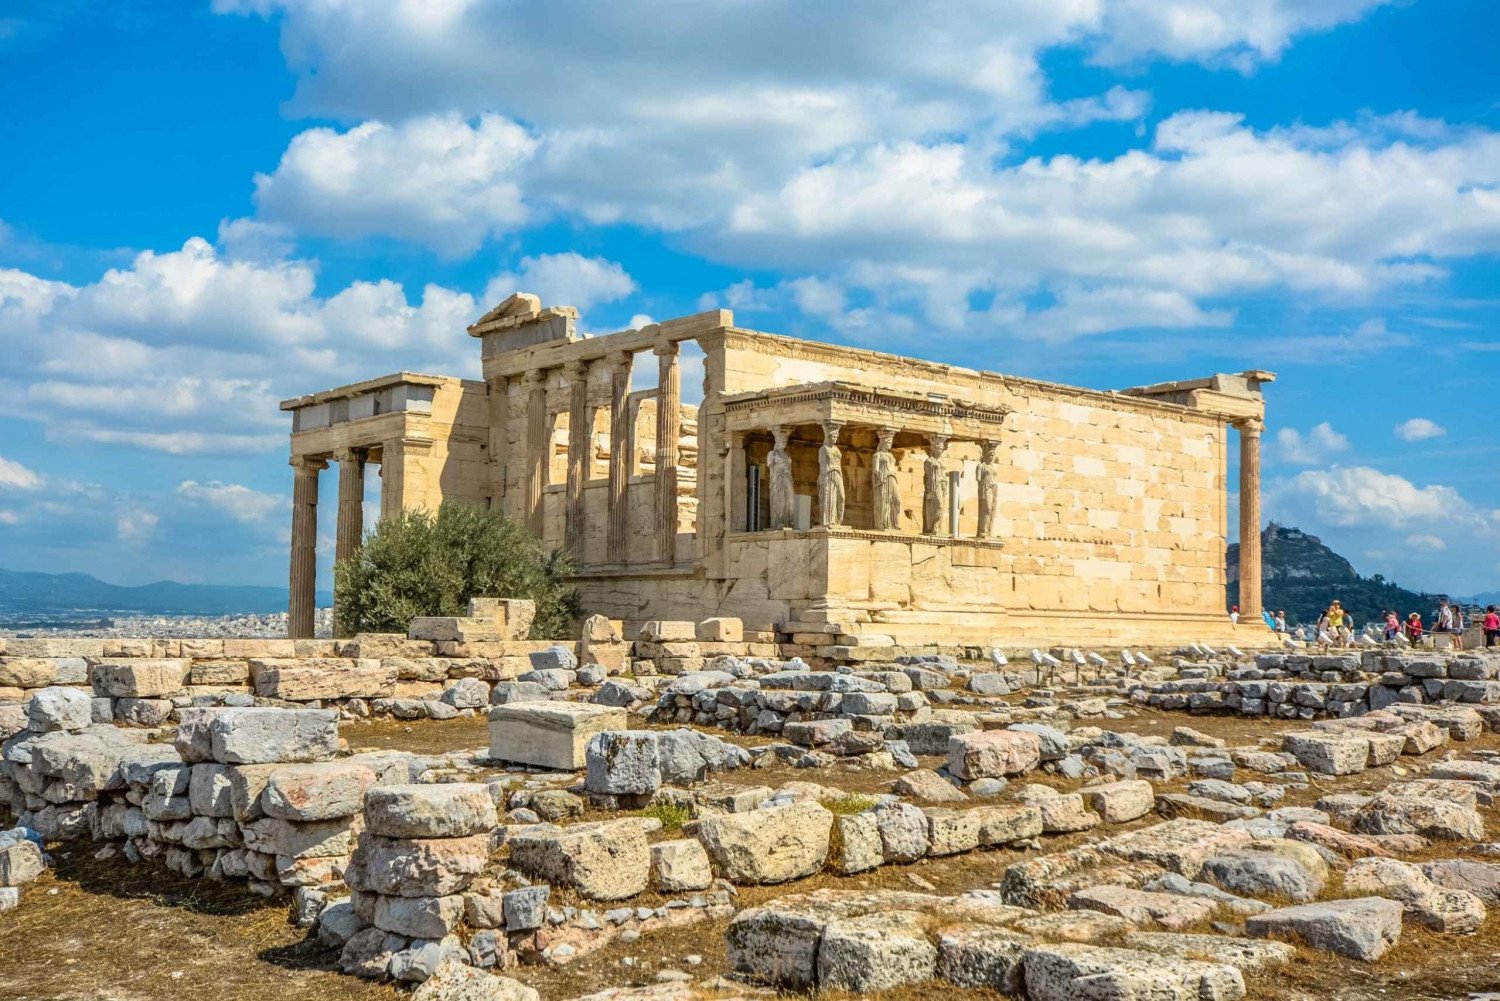 Athens: Acropolis Guided Walking Tour without Entry Ticket